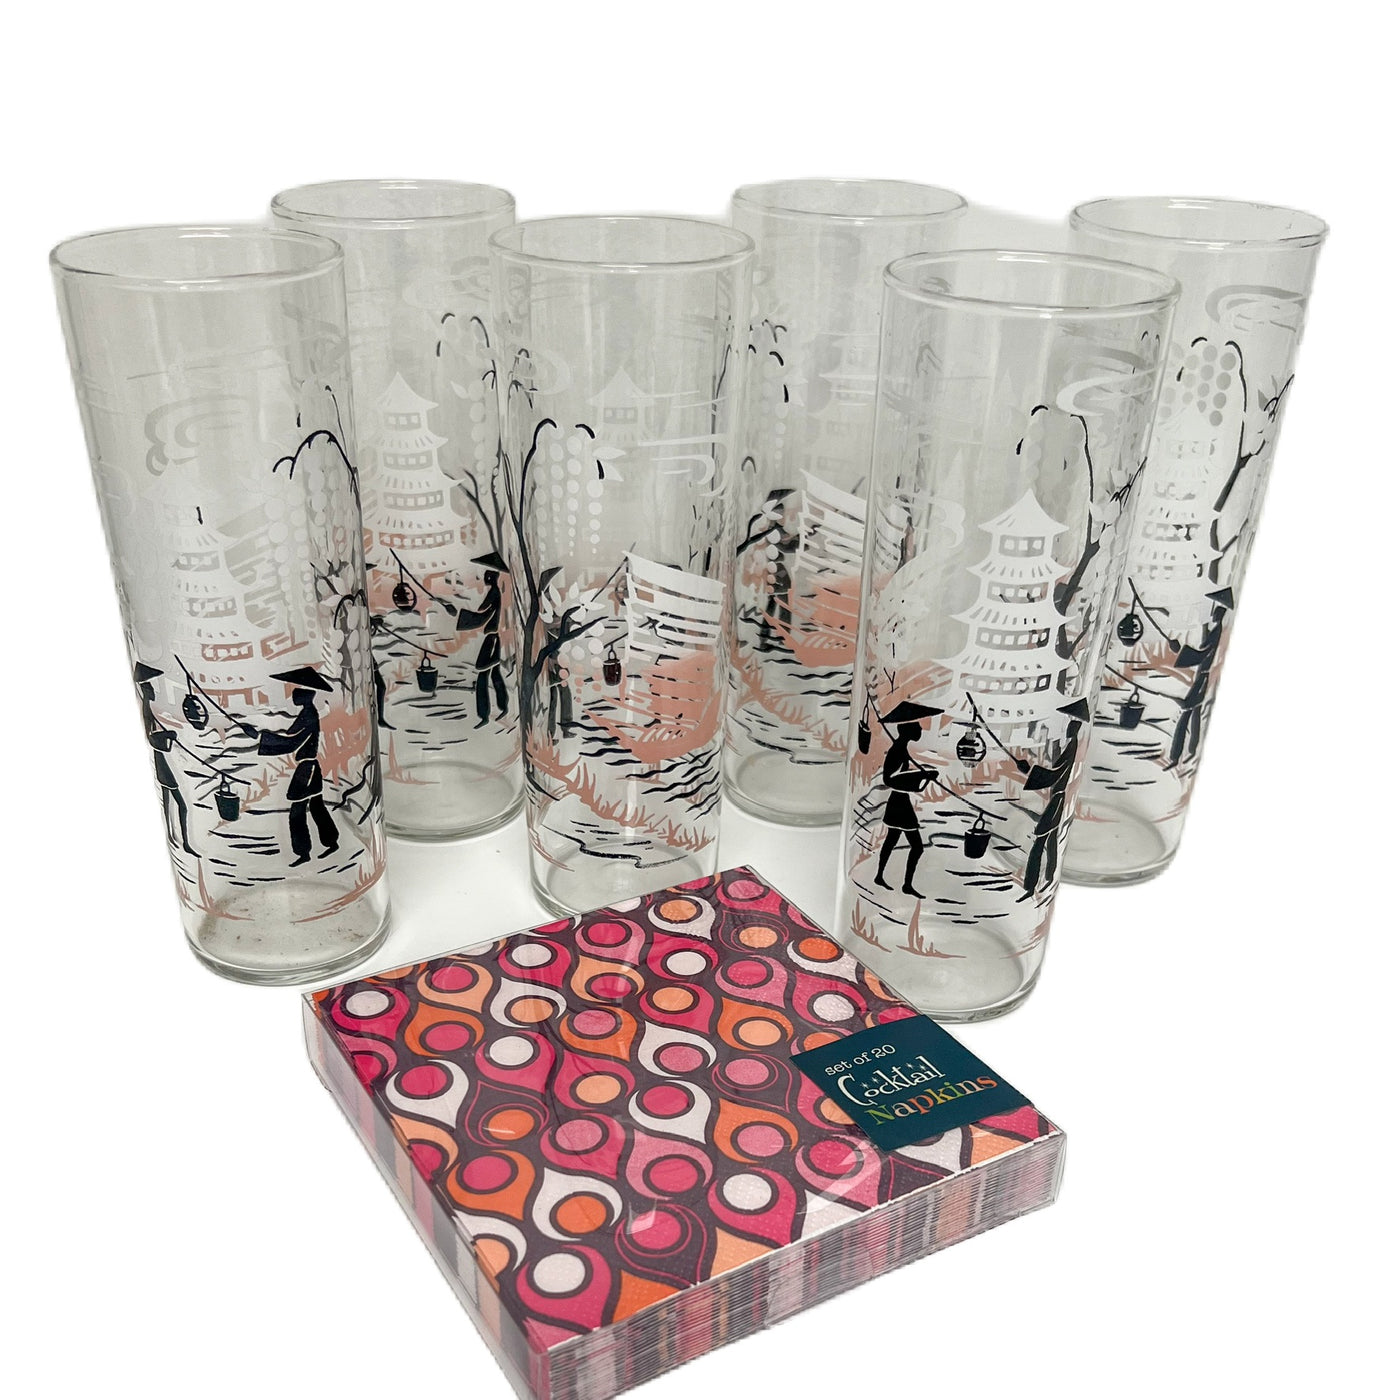 (23335) Set of Six Pink and Black Asian Themed Collins Glasses